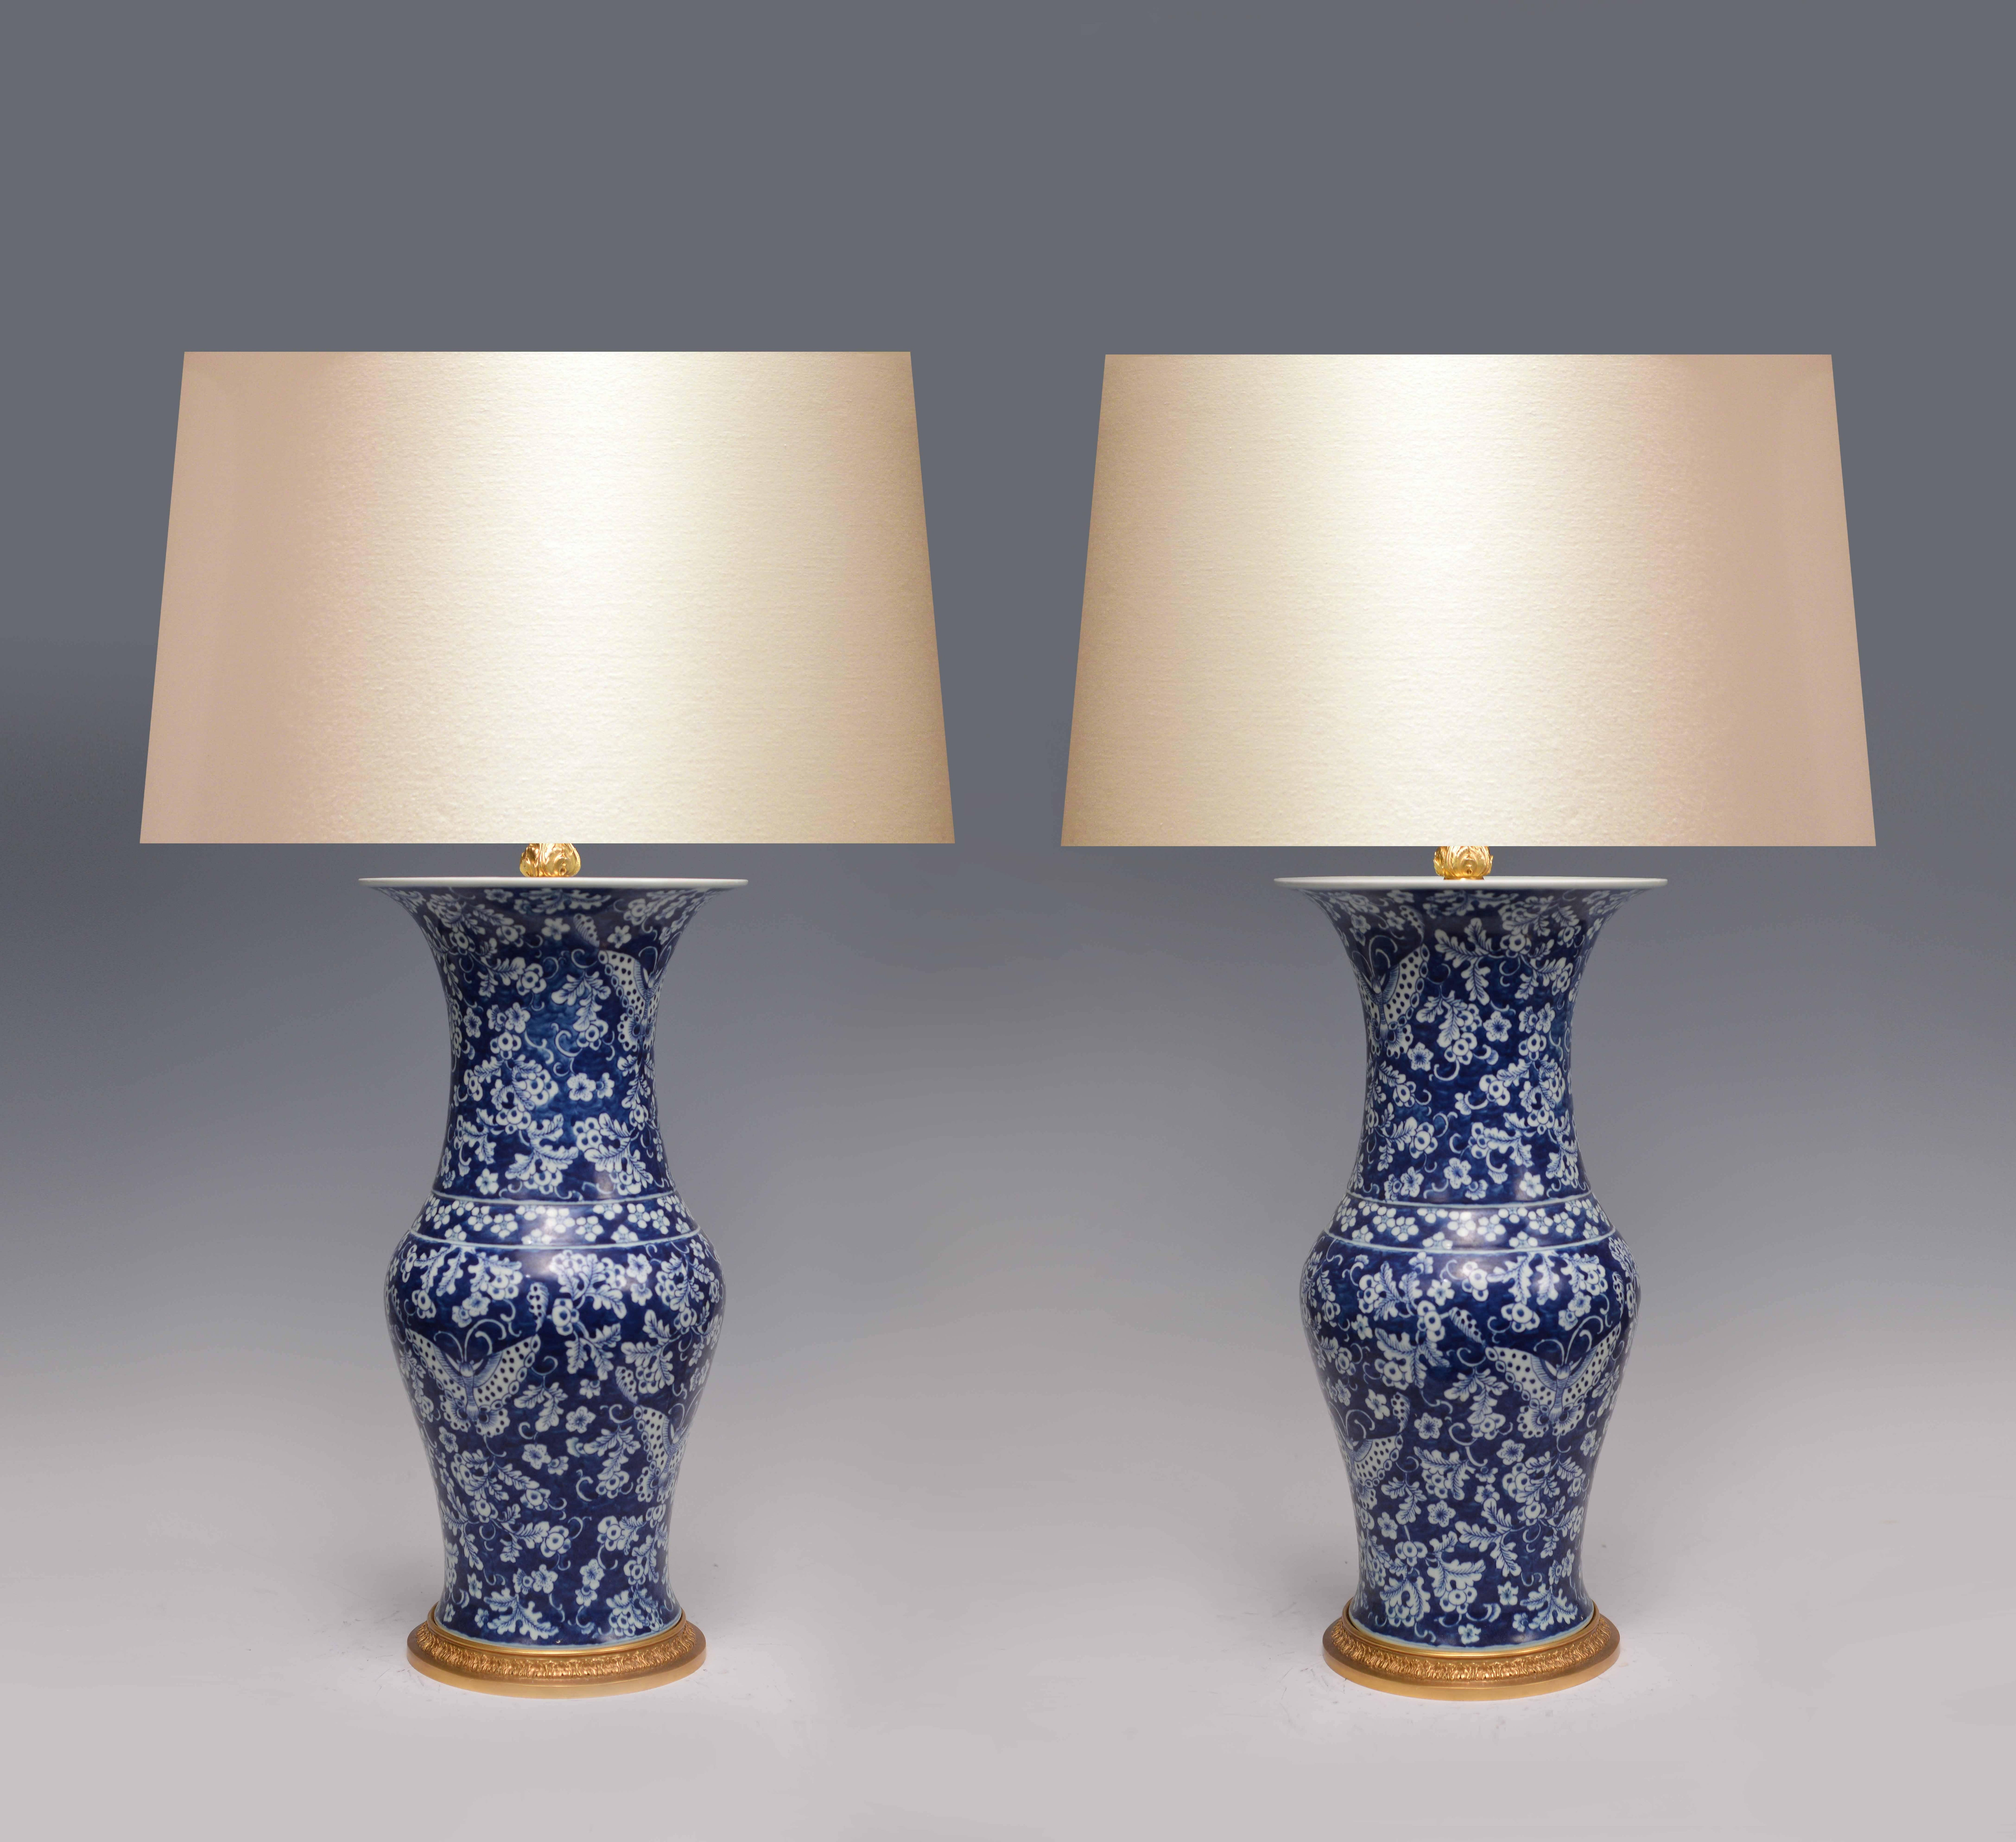 Blue and white porcelains with flowers and butterfly decoration, mounted as lamps with polish brass bases. Available in nickel plating and antique brass finished.
To the porcelain measures: 20 in.
(Lampshade not included)